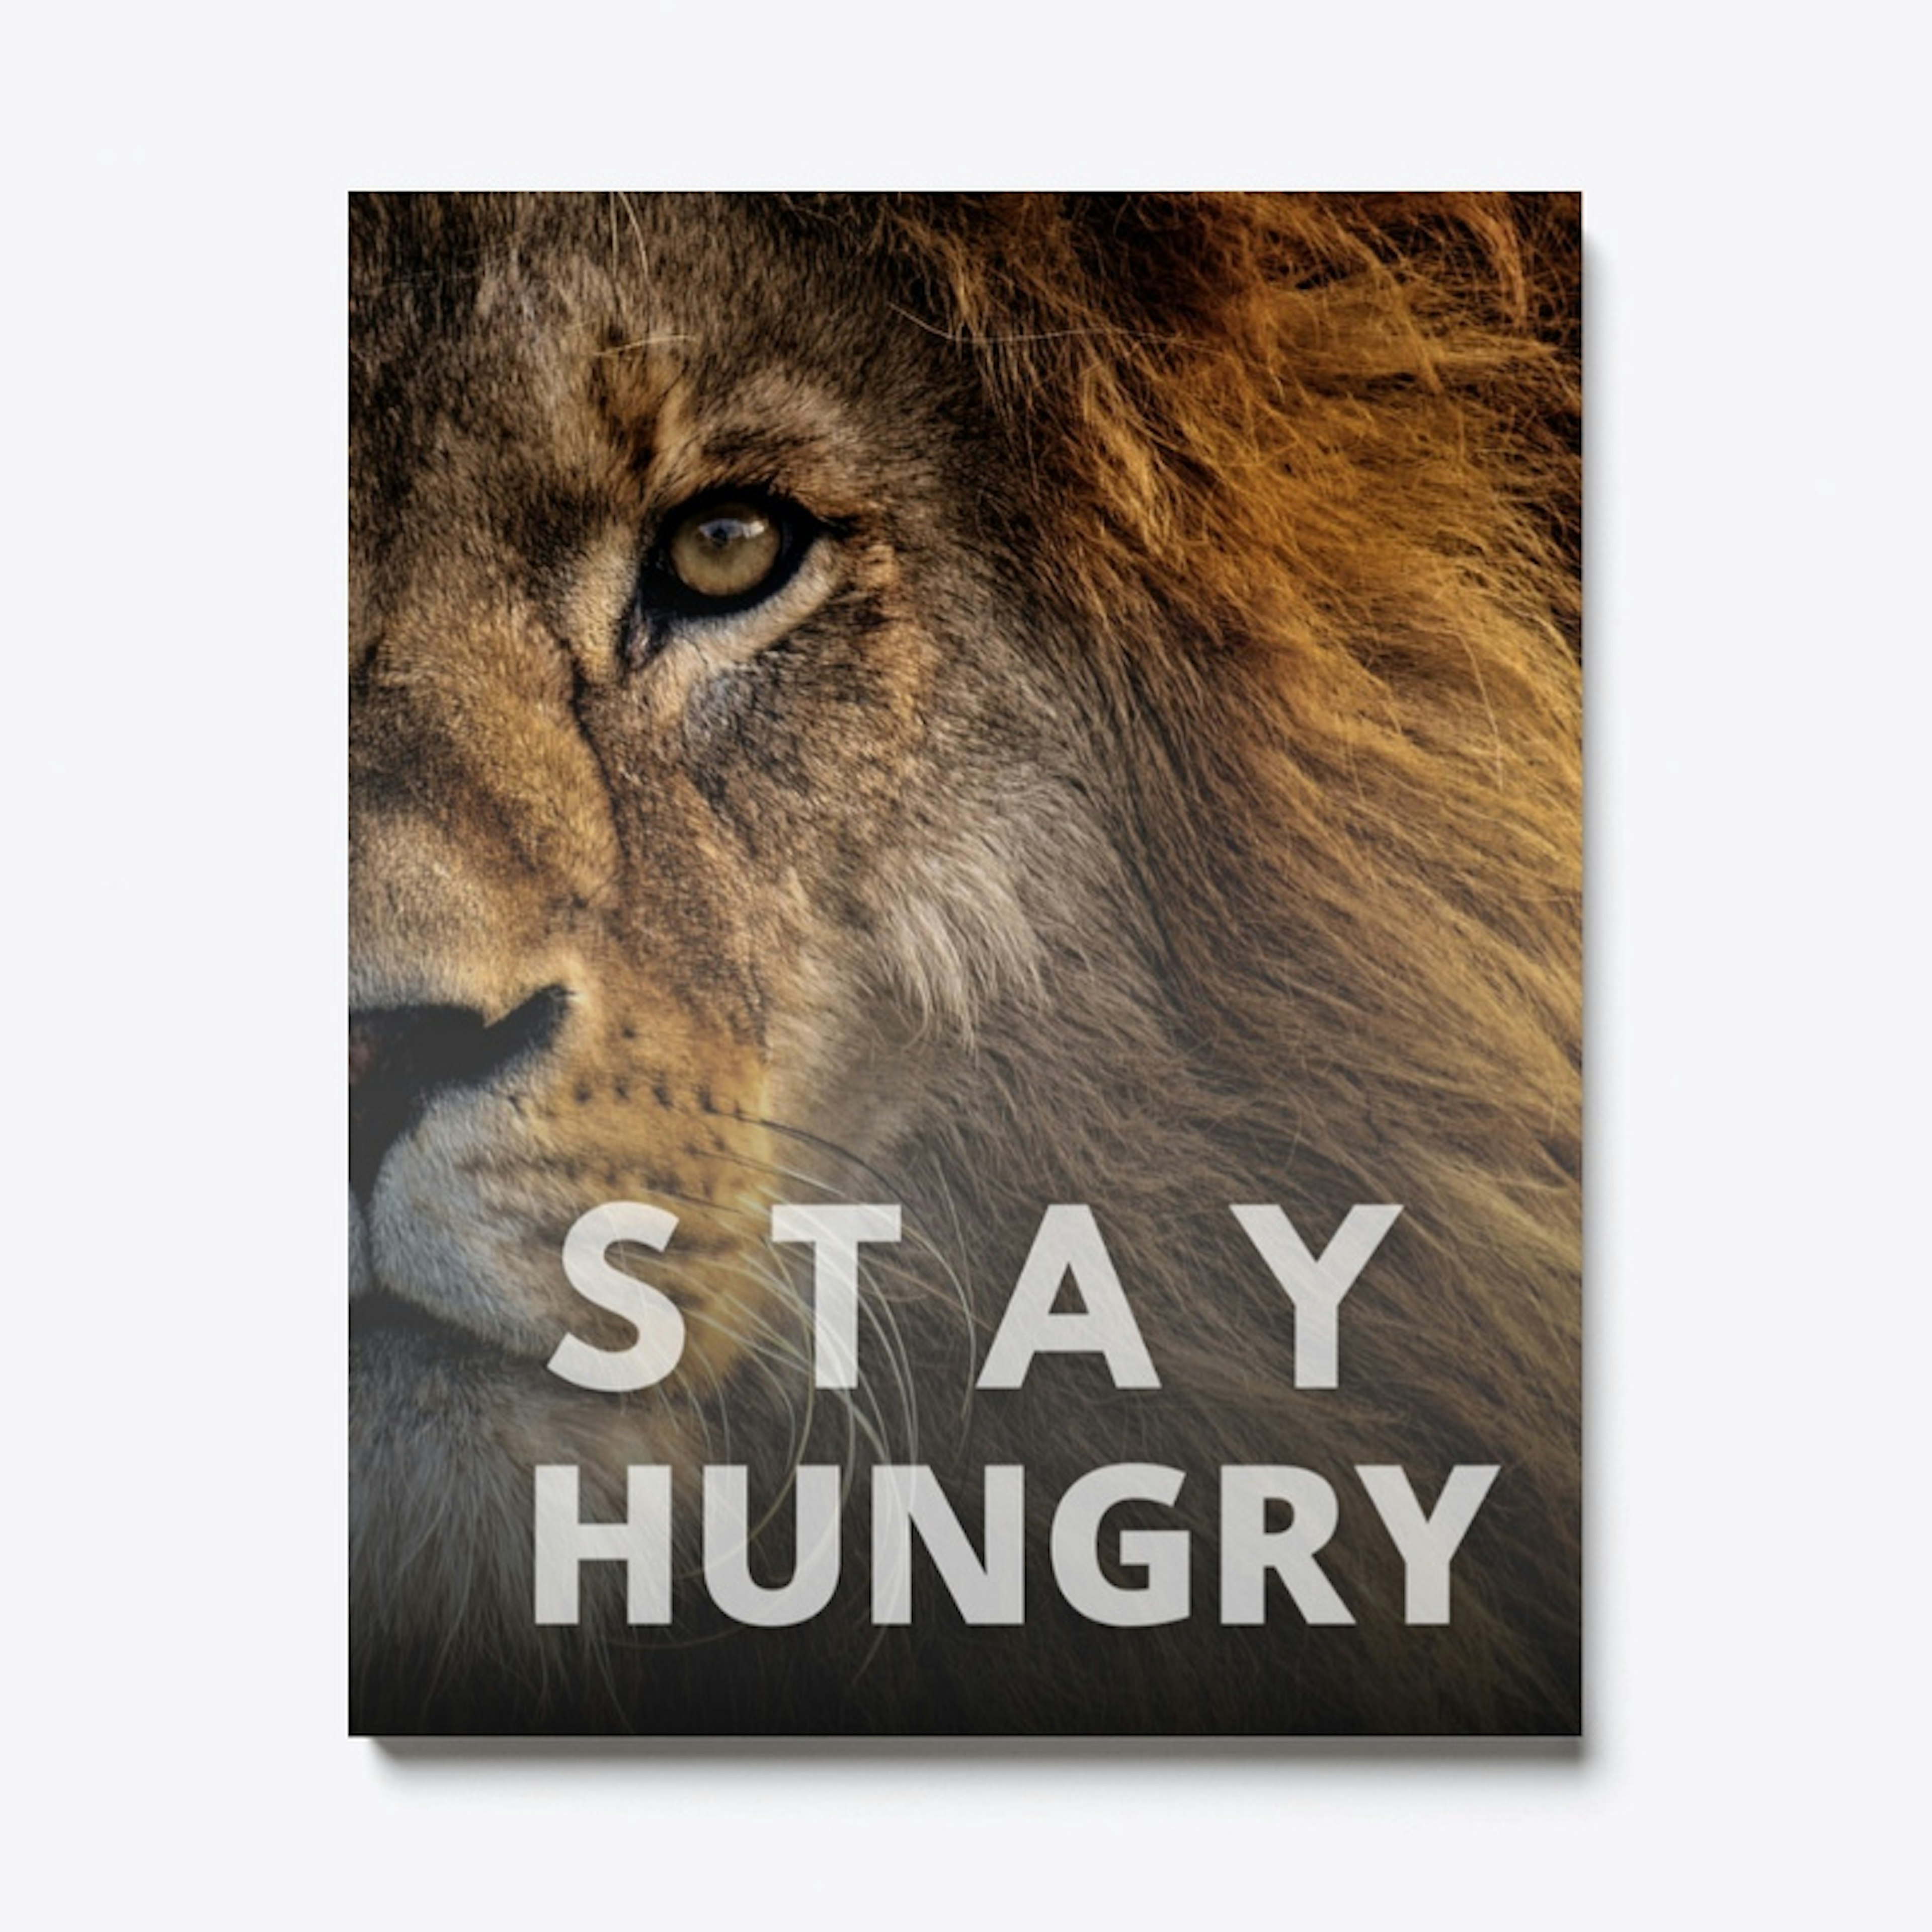 Stay Hungry (Lion)